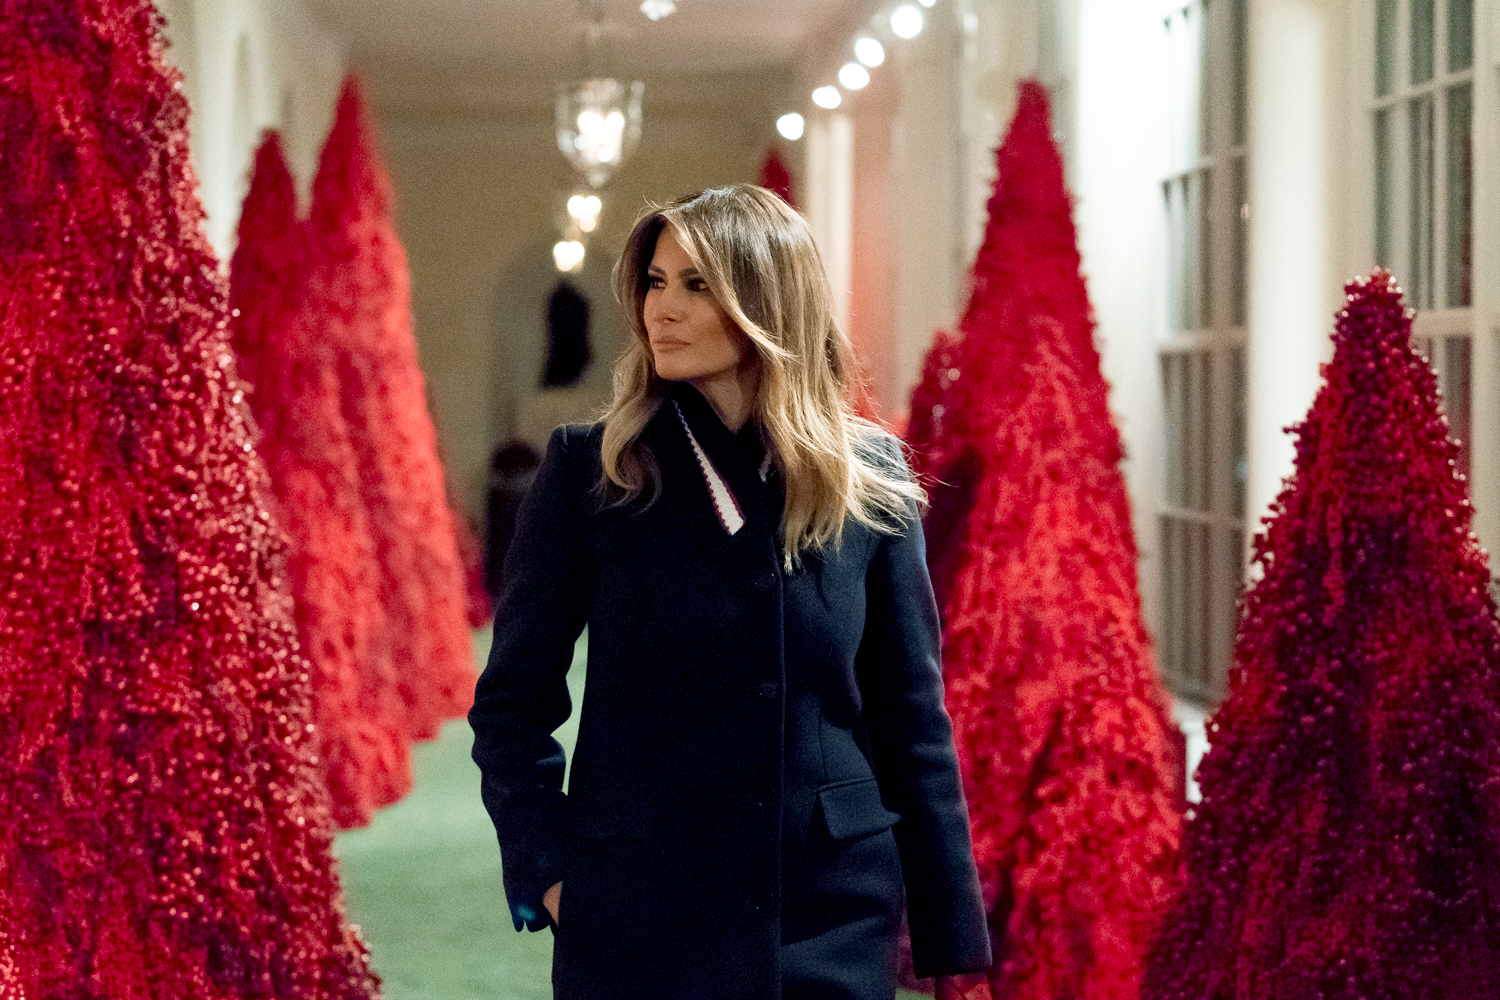 PHOTO: First lady Melania Trump reviews the Christmas decorations in the East Colonnade of the White House, Nov. 25, 2018.